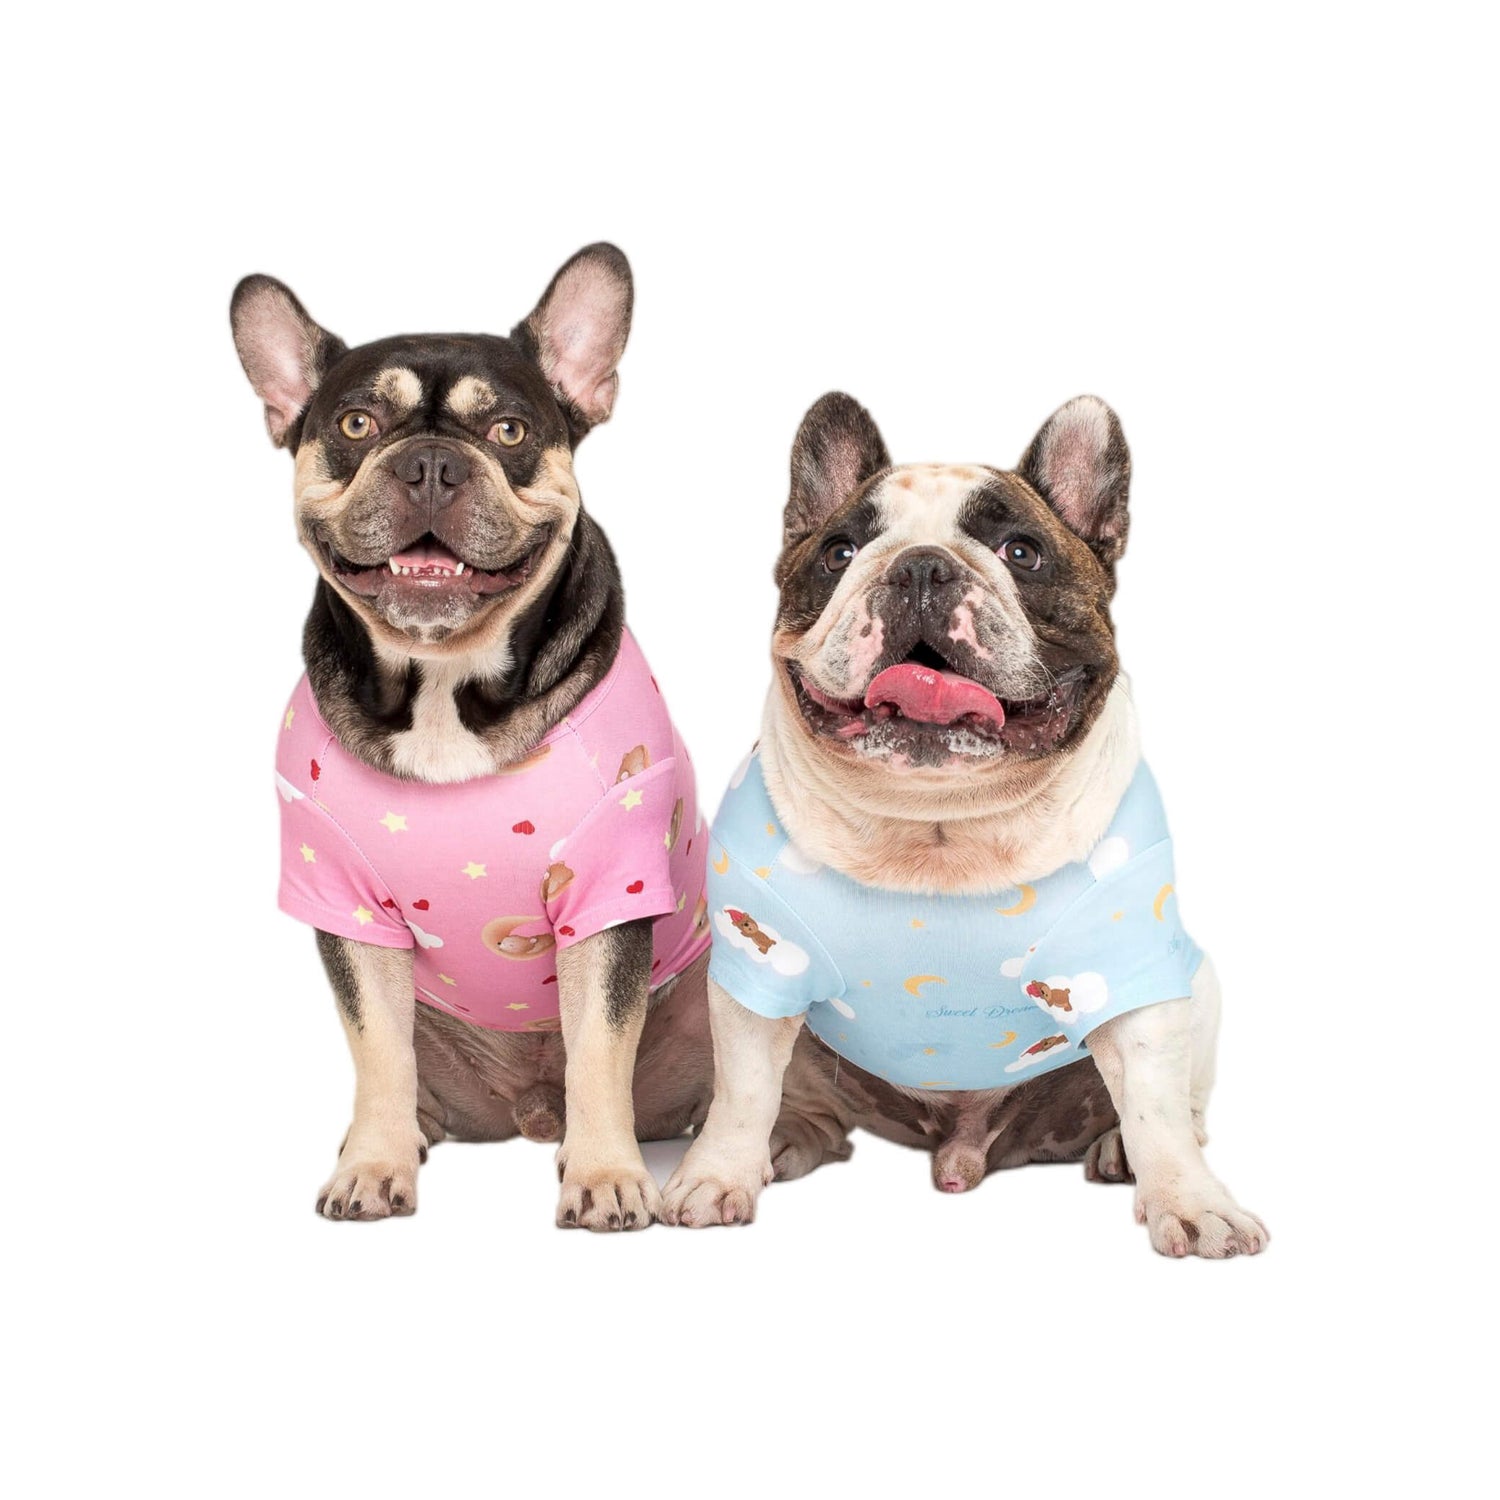 A close up of two French Bulldogs wearing Vibrant Hound's Lil dreamer pink and Lil dreamer blue pyjamas for dogs.